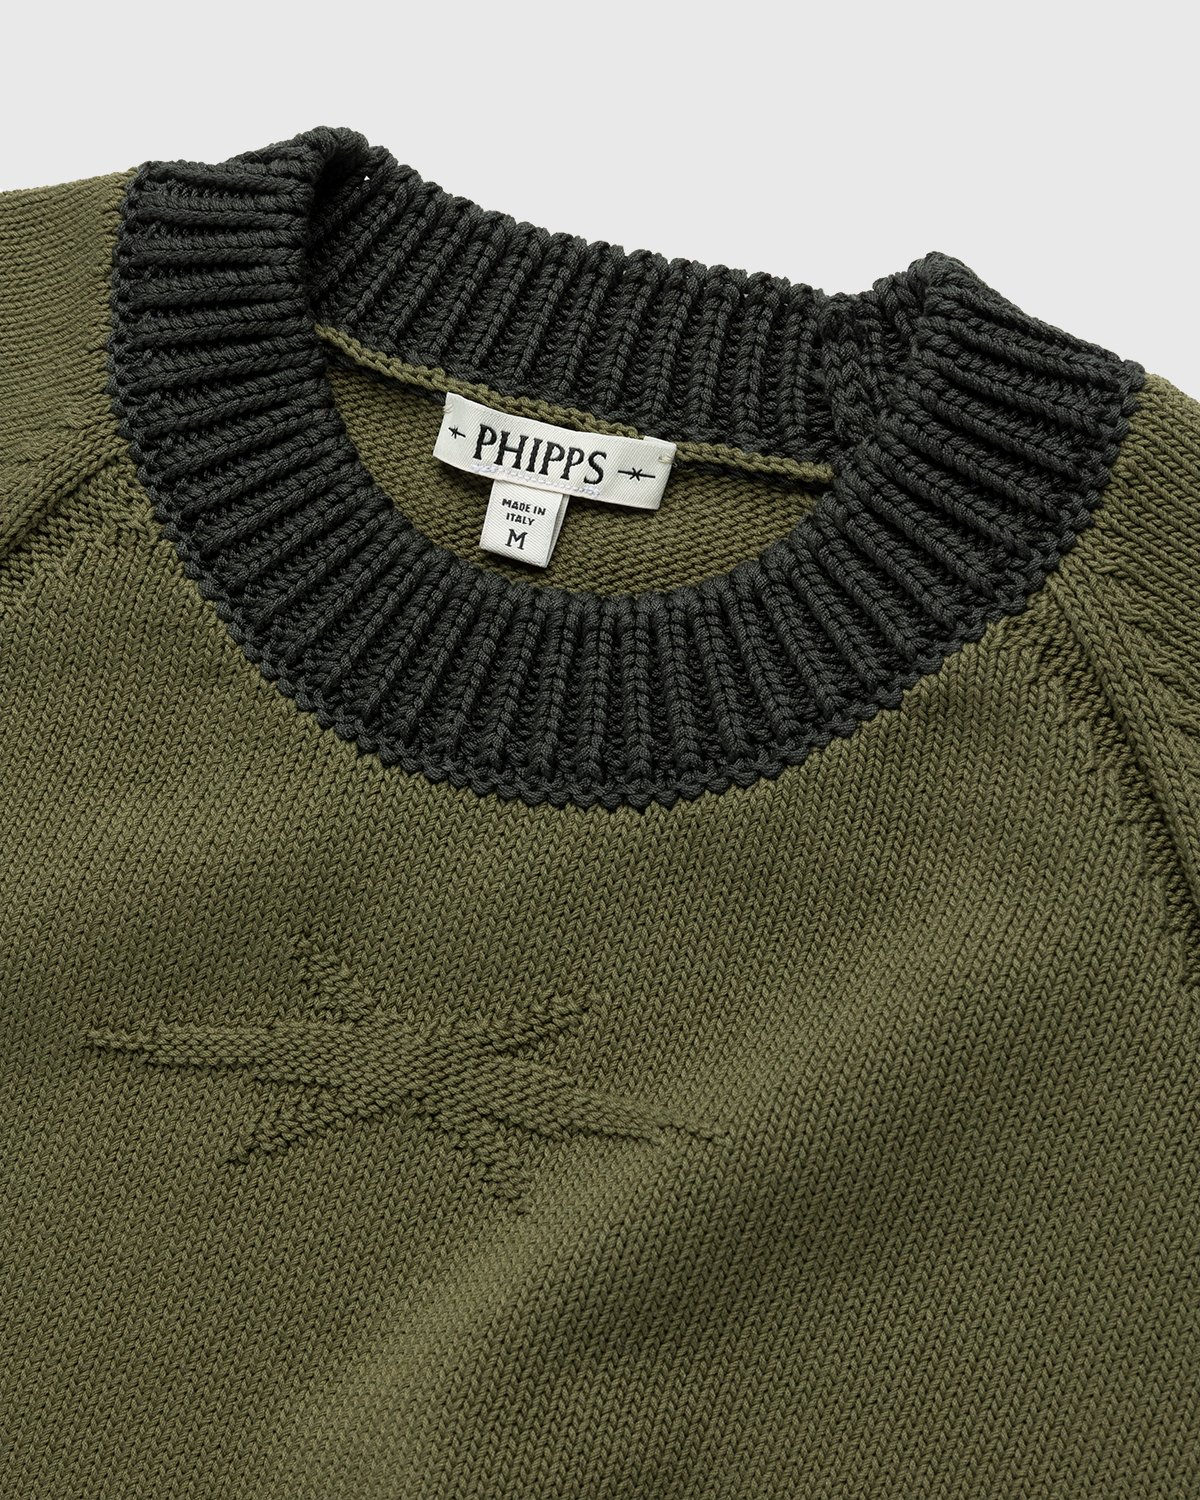 Phipps - Armor Knit Green - Clothing - Green - Image 3